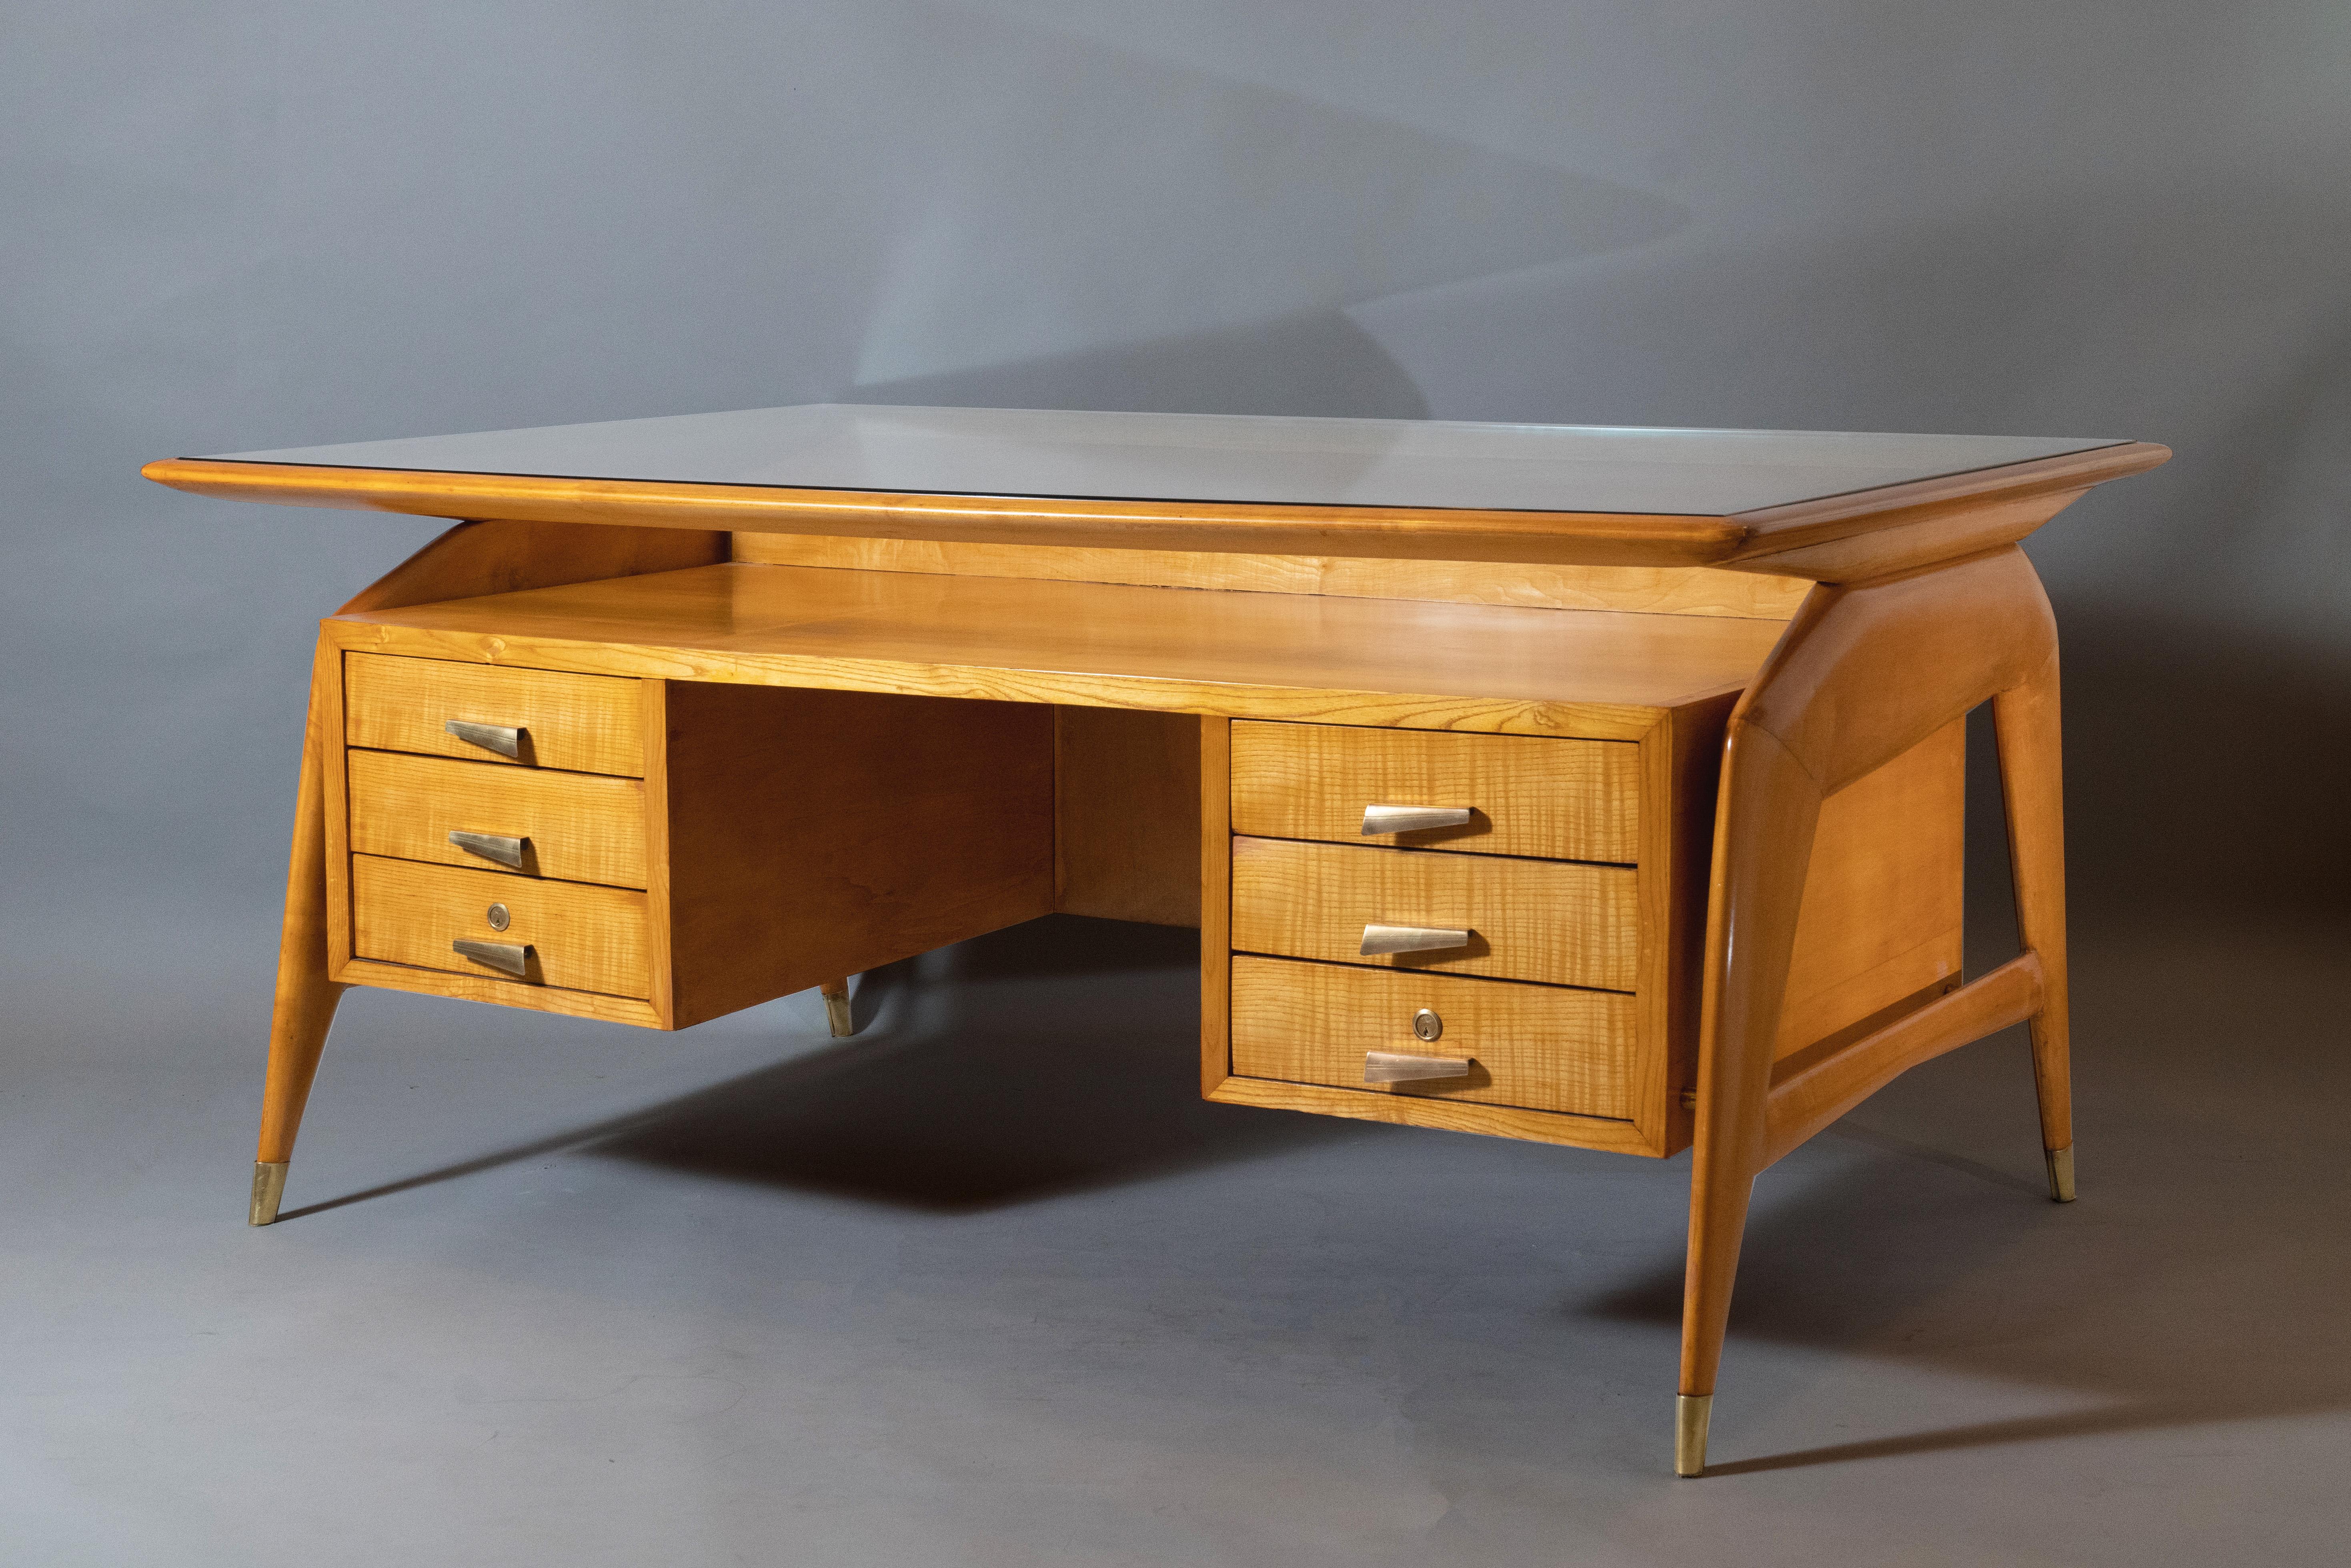 Carlo de Carli (1910 - 1999)
 
An important sculptural desk with six drawers by seminal Milanese architect and theorist Carlo de Carli, in fruitwood with polished brass handles and sabots. The floating top, fit with a rectangular glass insert that